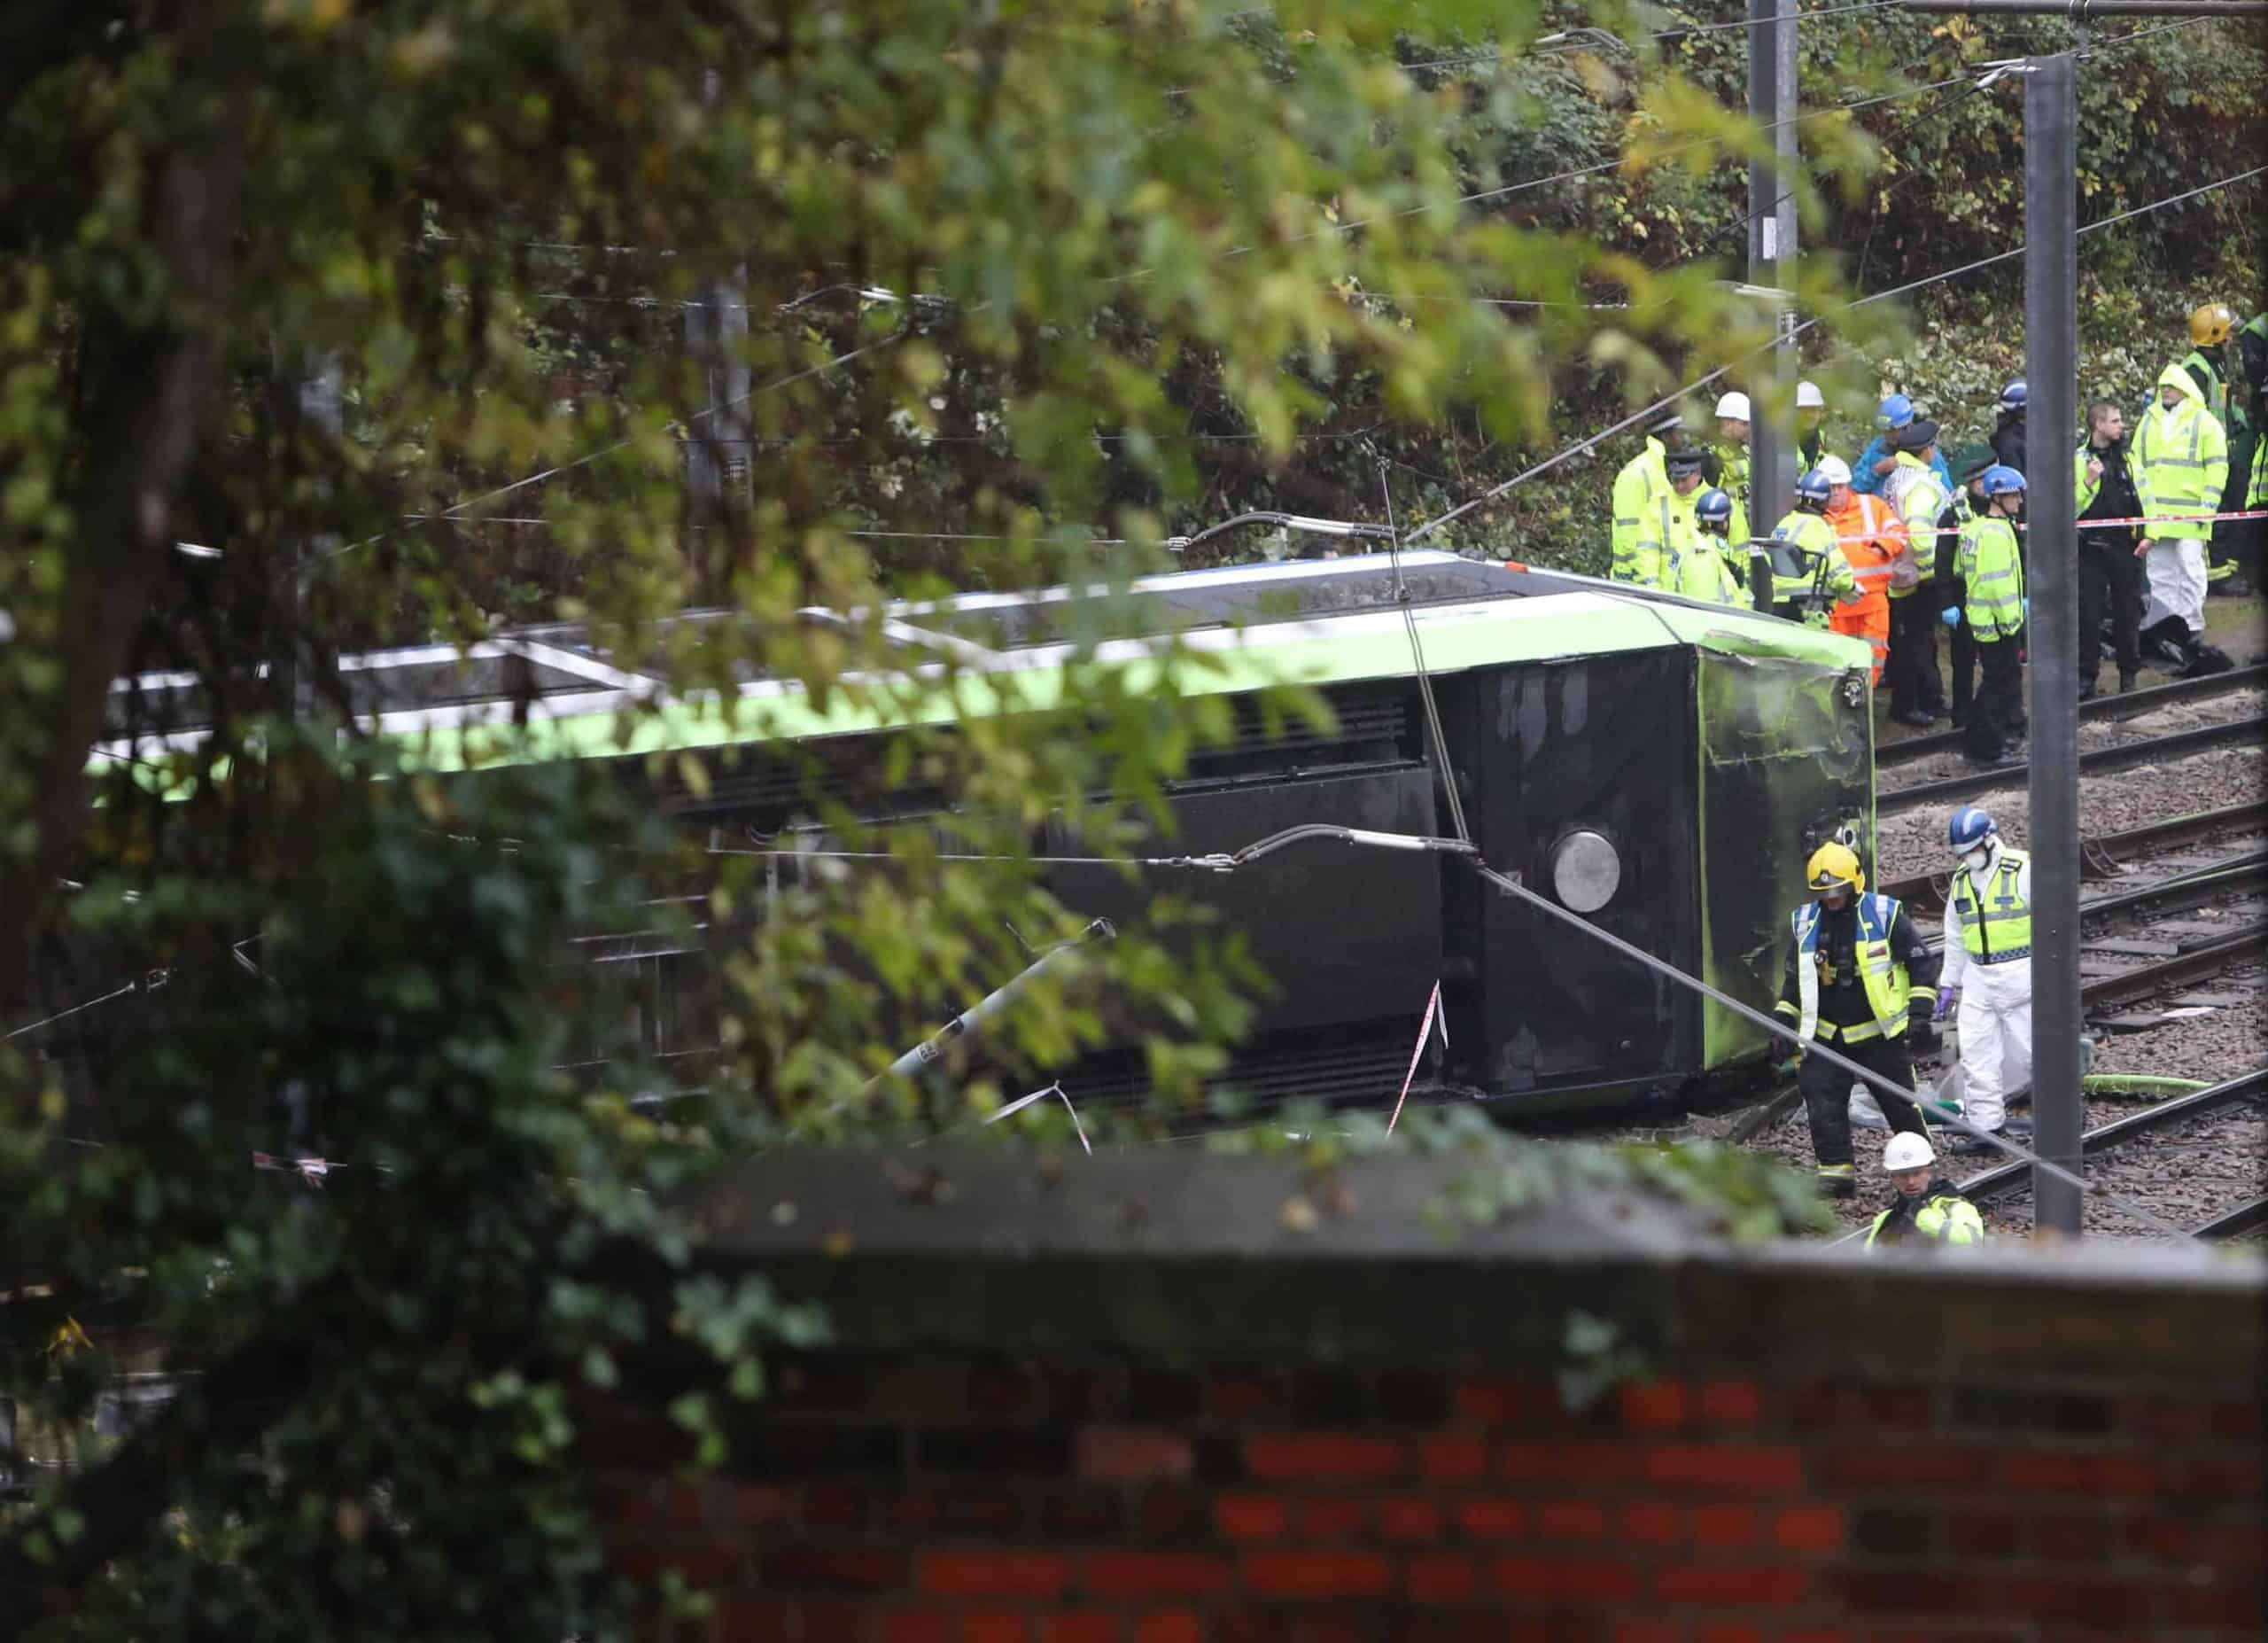 No charges over Croydon tram crash which killed seven people